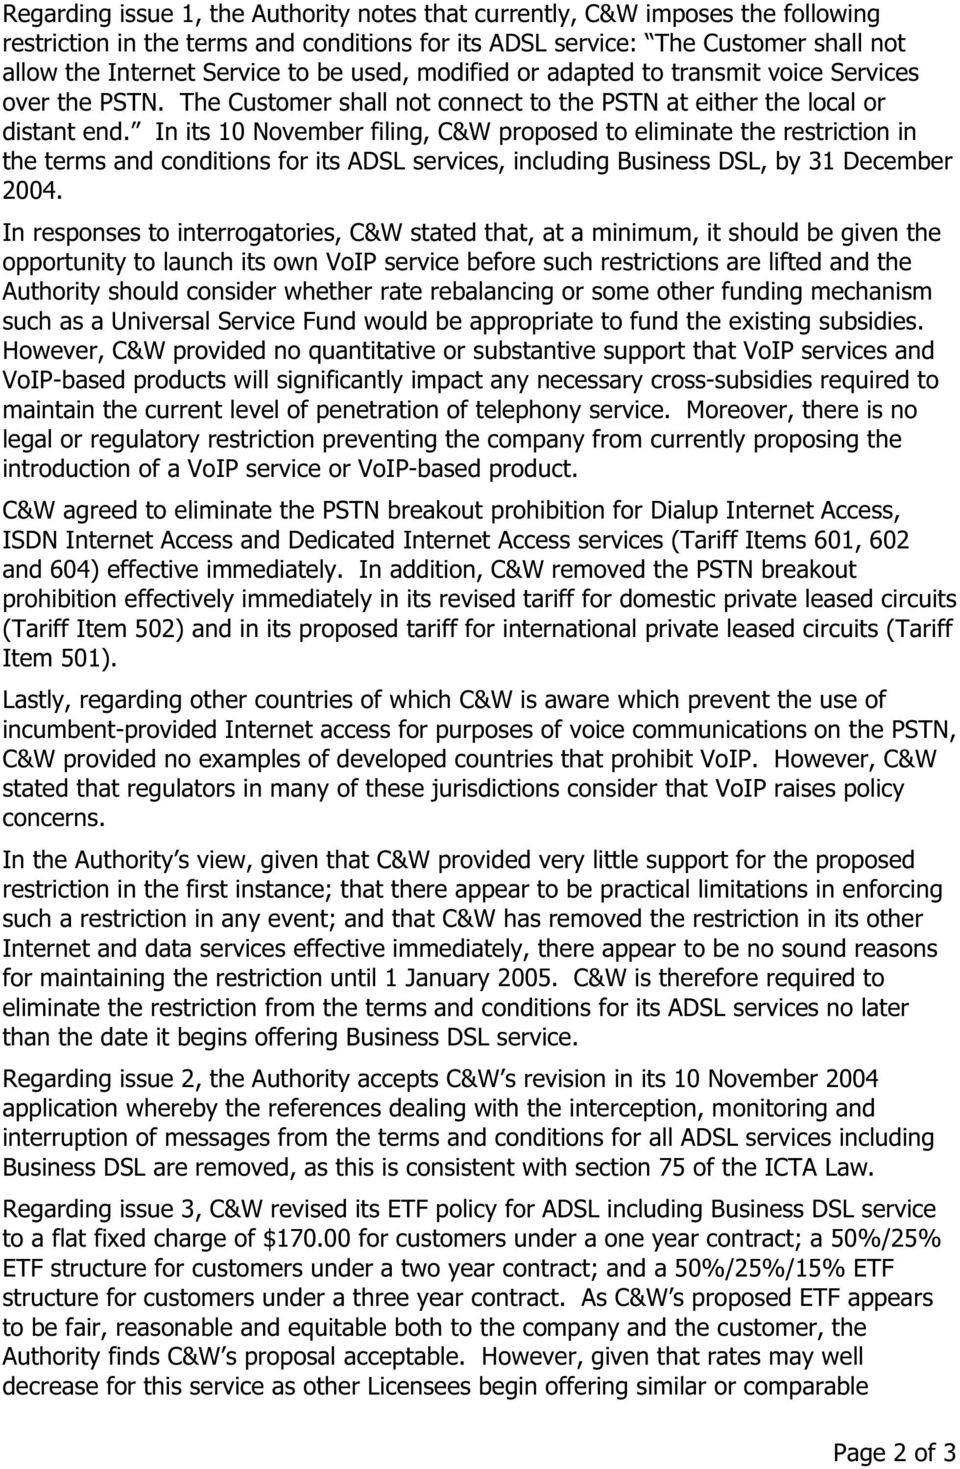 In its 10 November filing, C&W proposed to eliminate the restriction in the terms and conditions for its ADSL services, including Business DSL, by 31 December 2004.